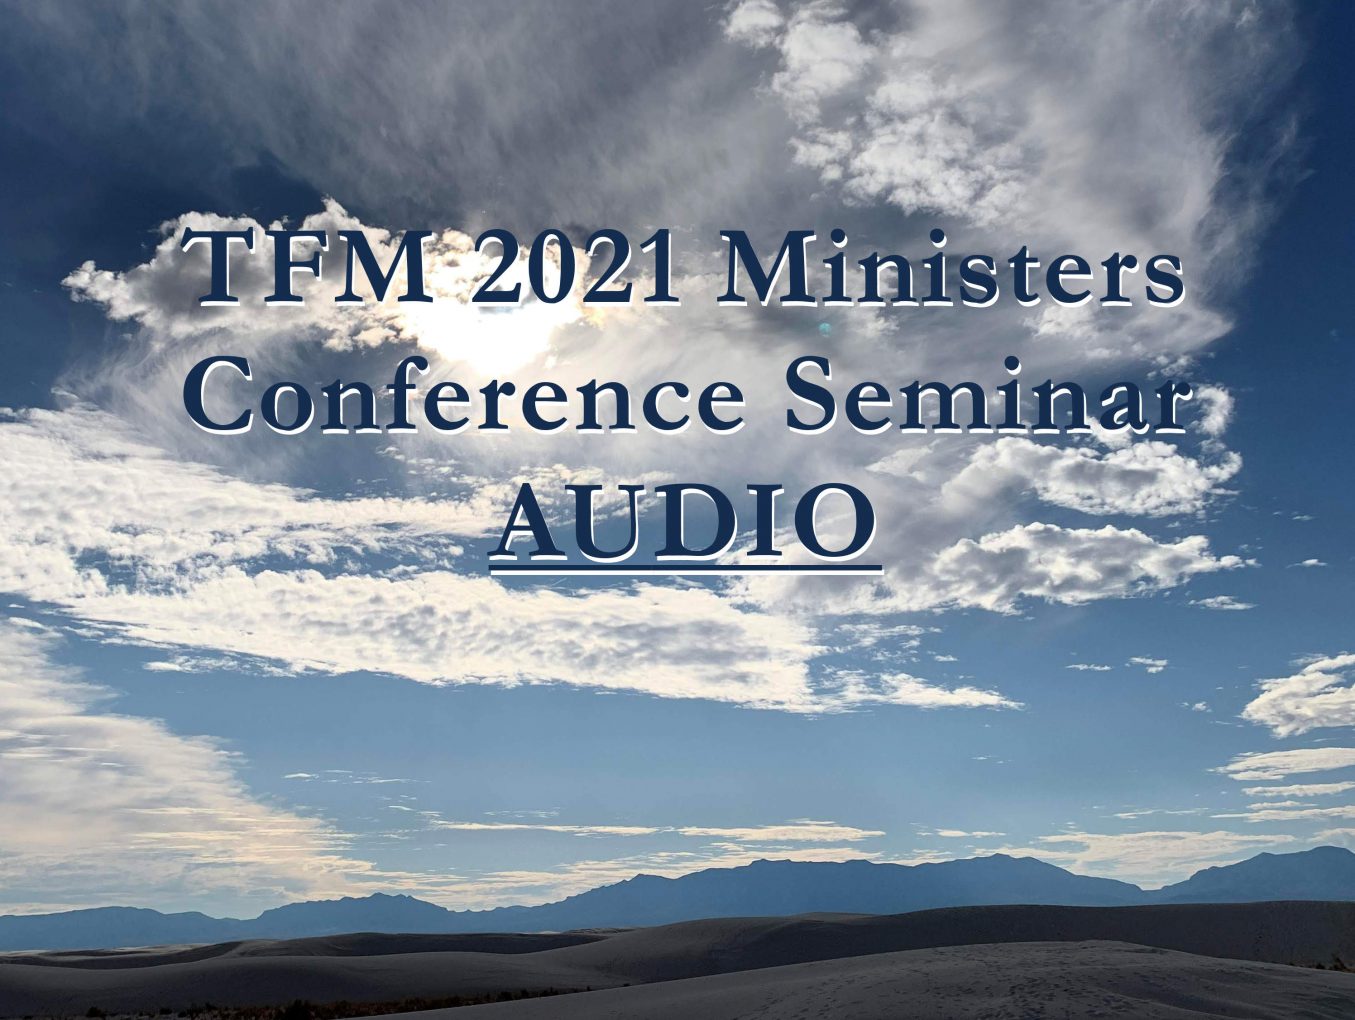 2021 Ministers Conference Seminars - AUDIO